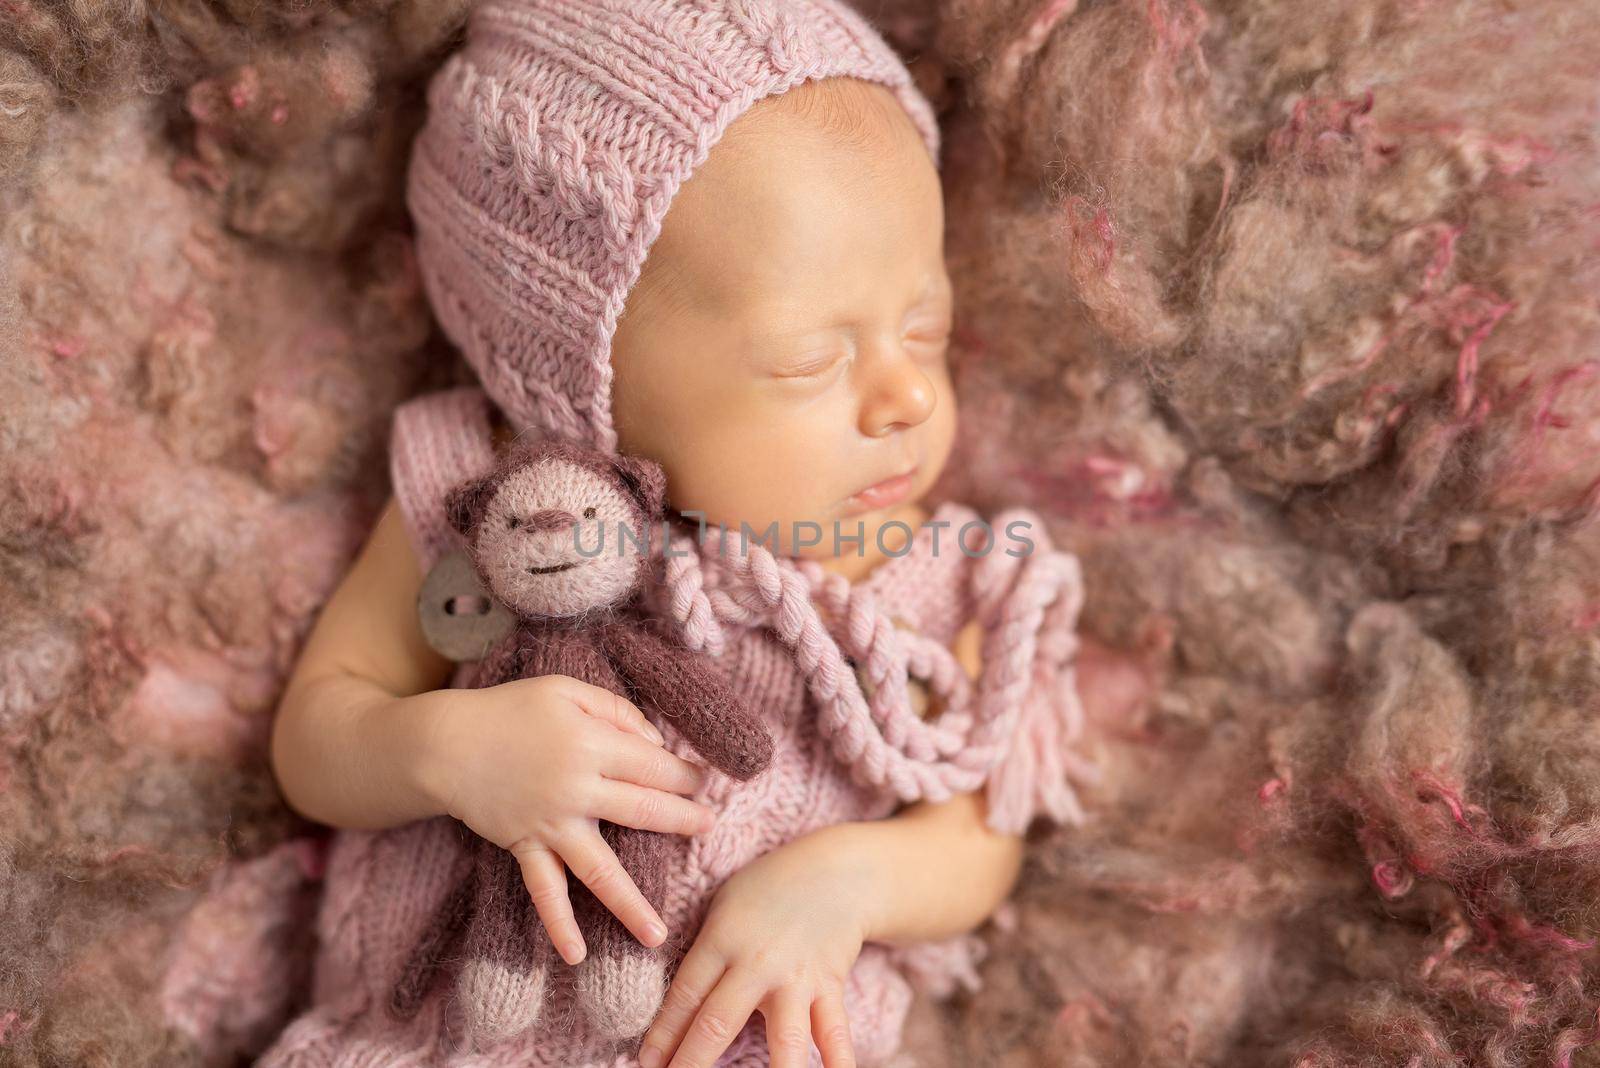 cute newborn baby on fluffy blanket in pink knitted hat and suit, with toy in hand